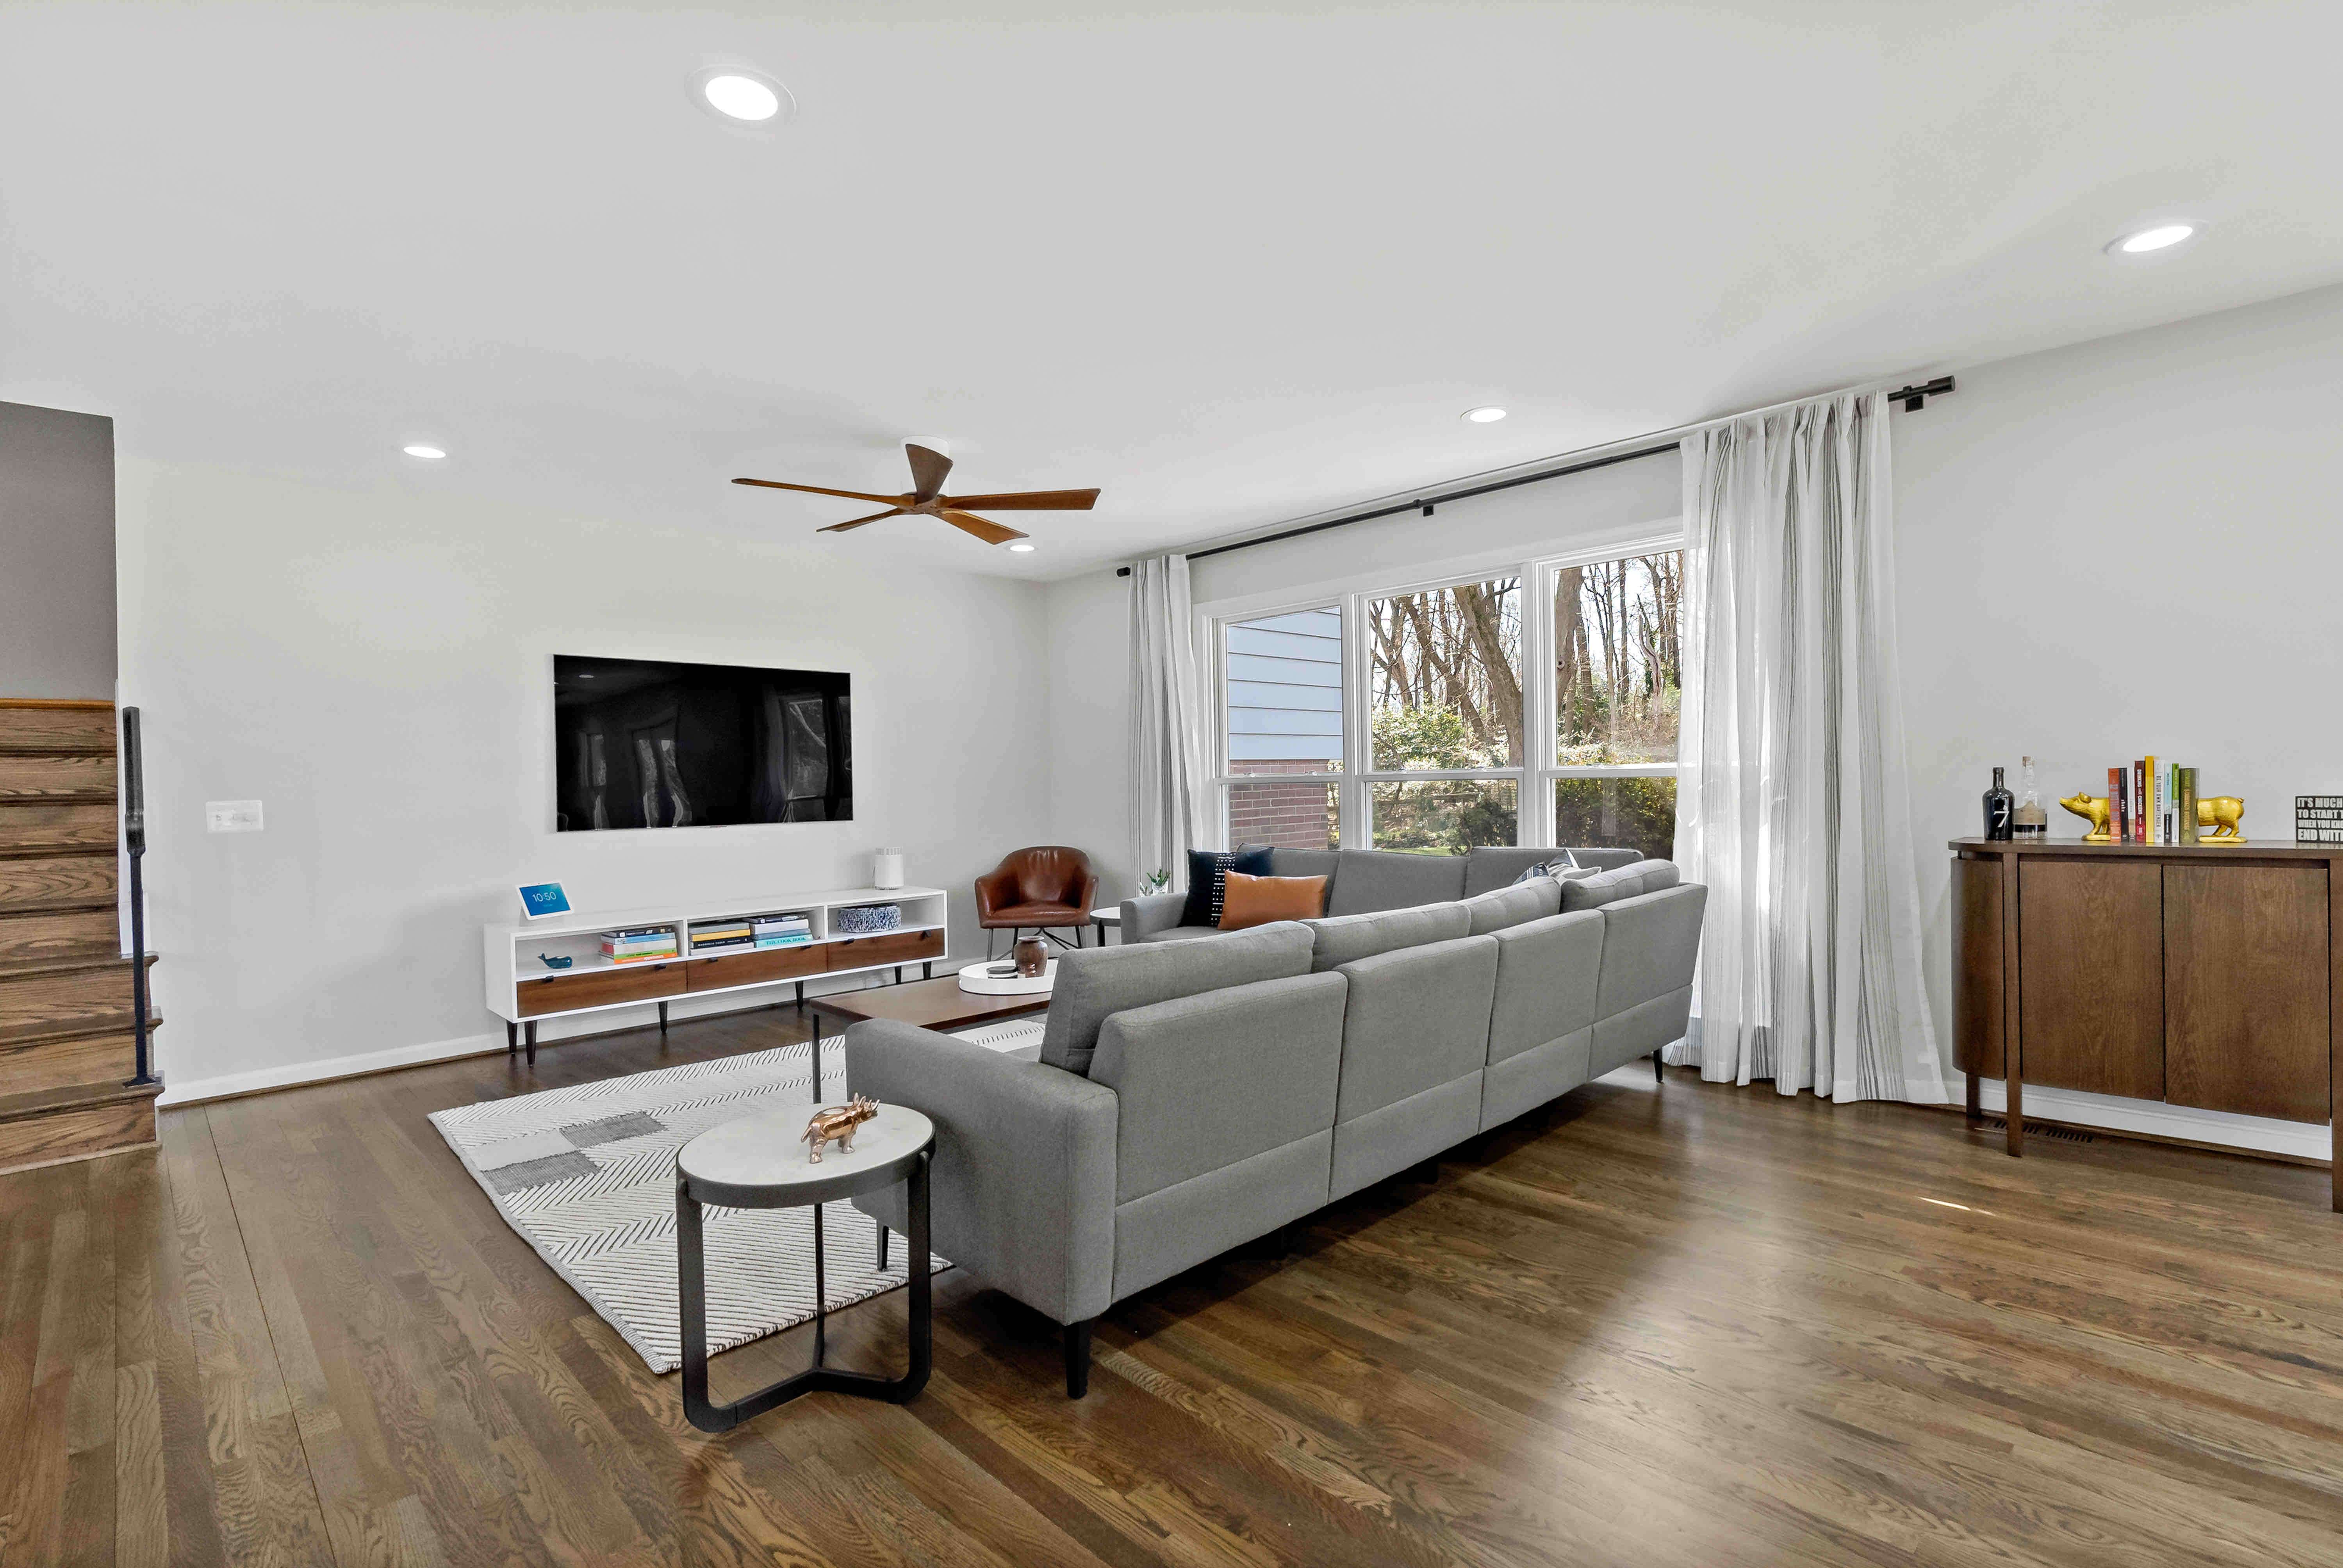 Open living room with ceiling fan and window treatment